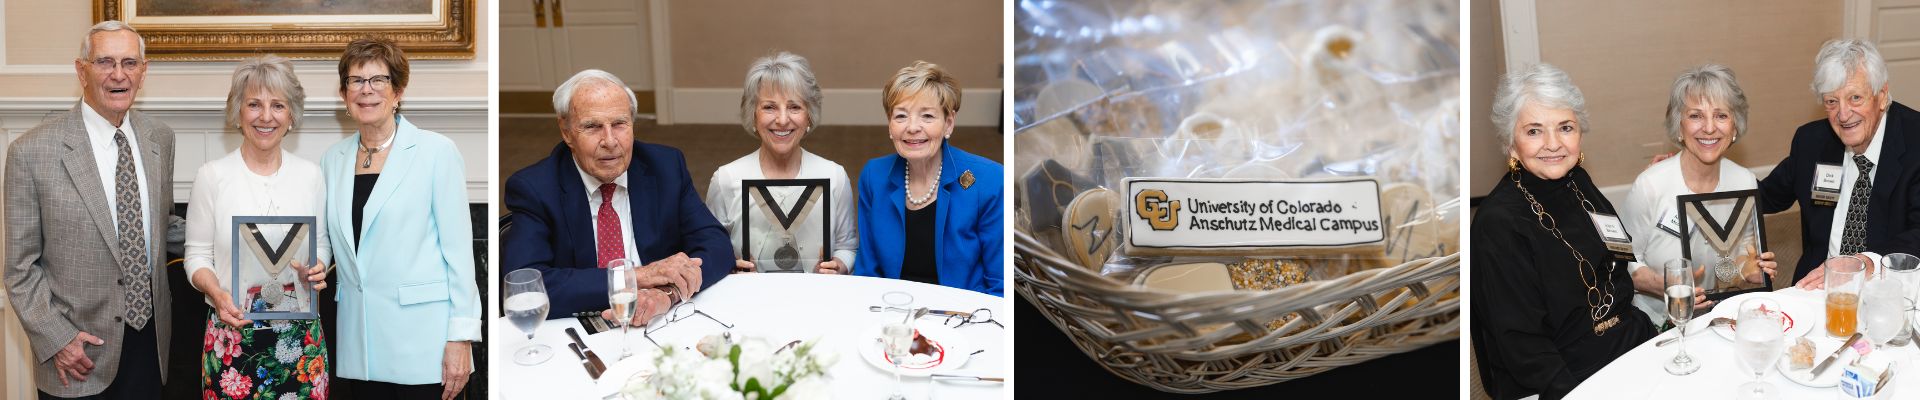 A collage of event pictures taken during the Brown Moore Endowed Chair celebration.